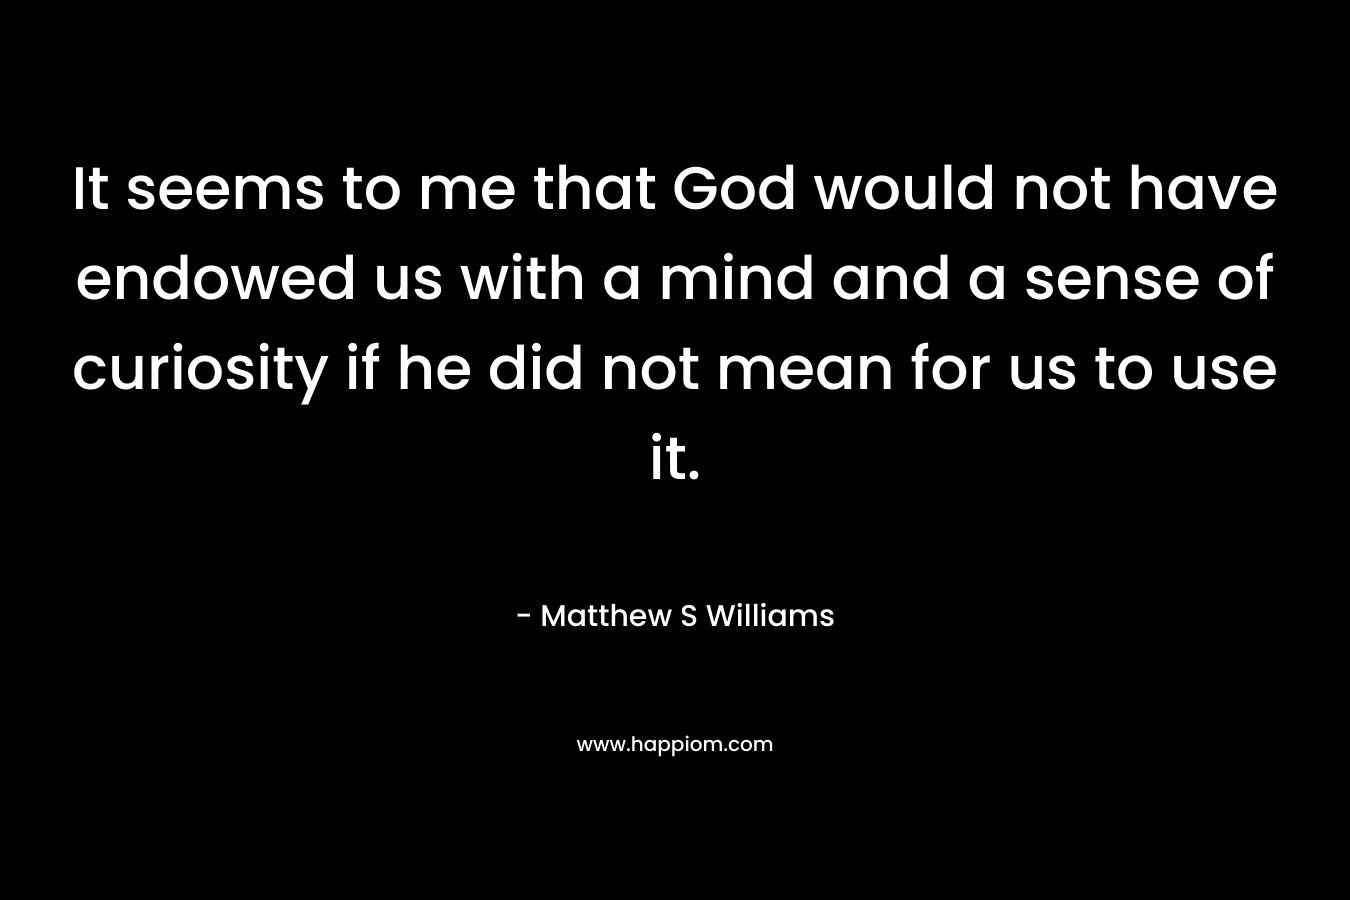 It seems to me that God would not have endowed us with a mind and a sense of curiosity if he did not mean for us to use it.